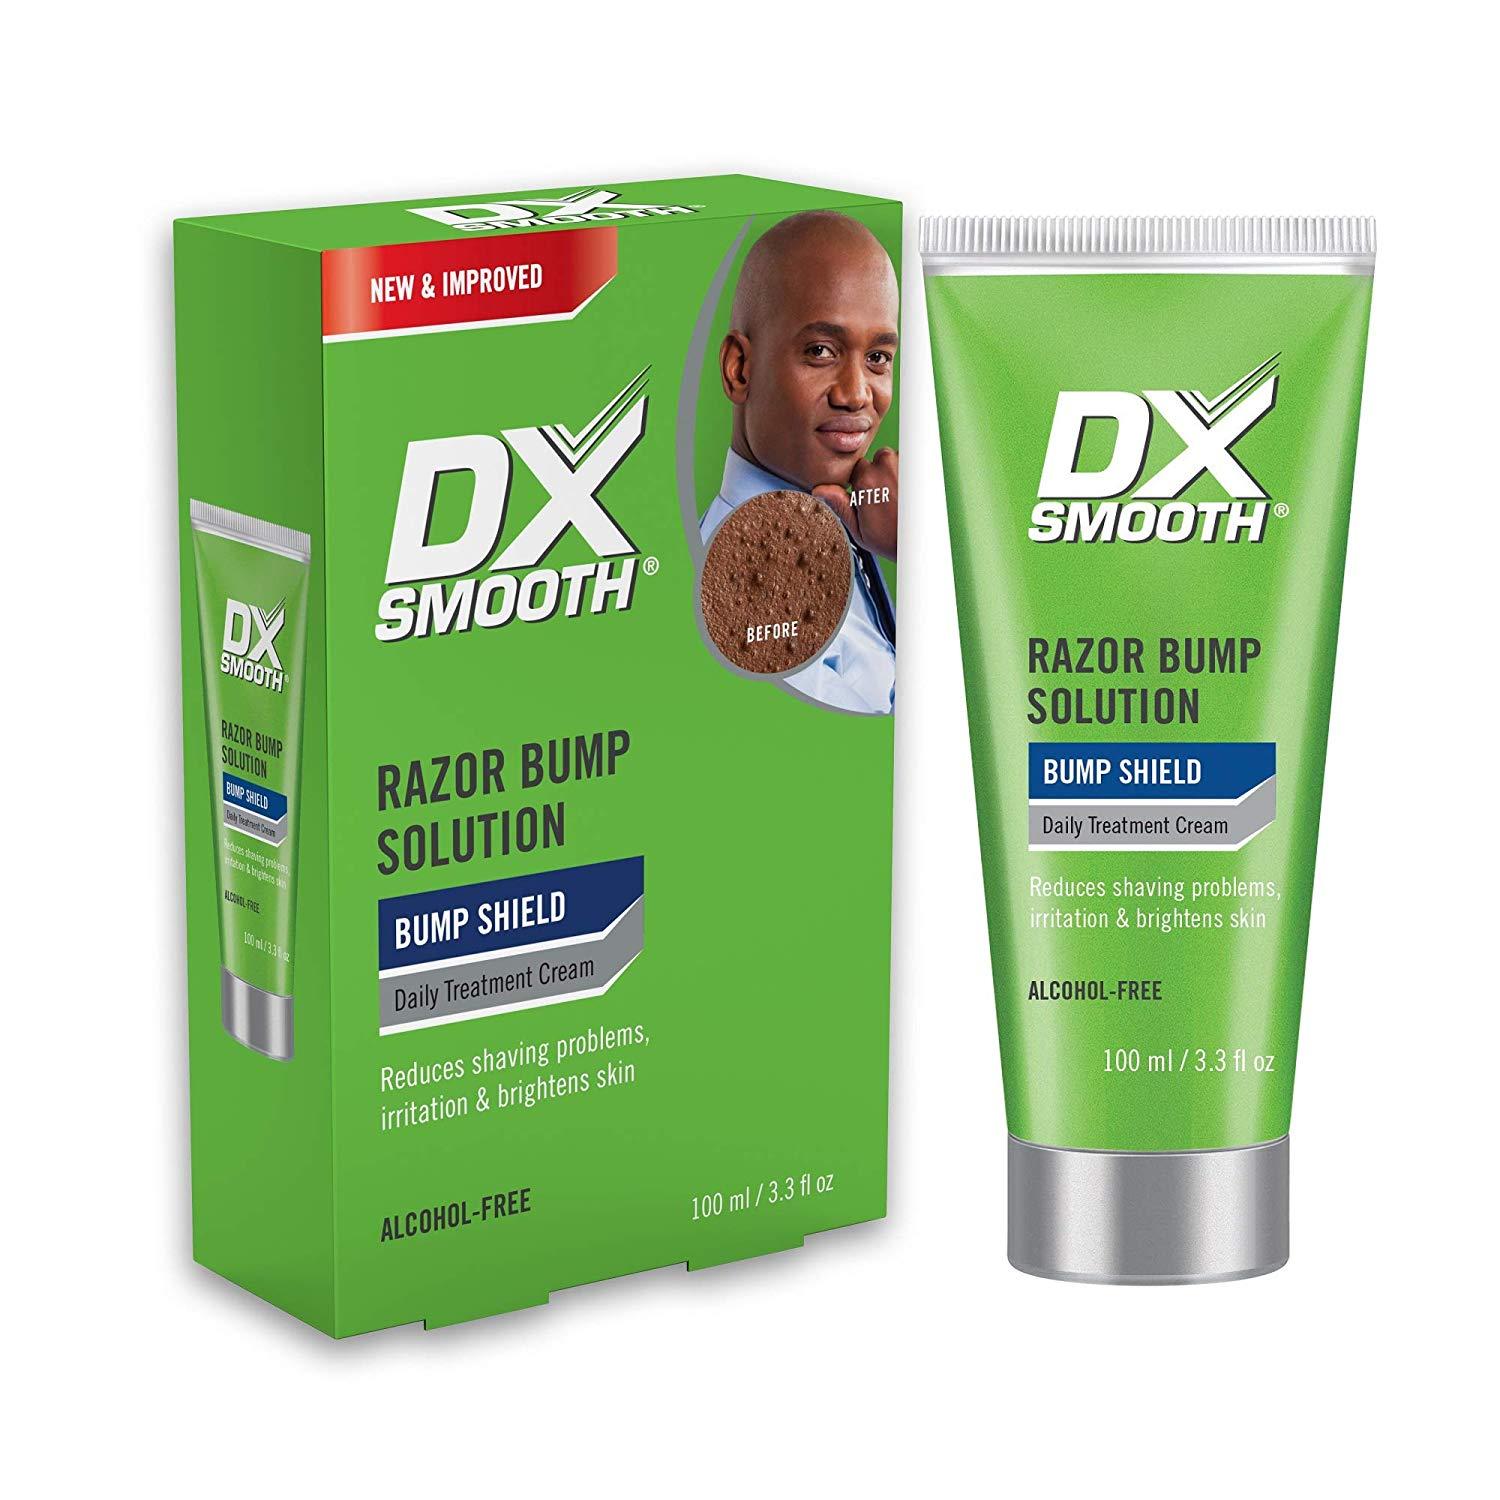 Shaving and Personal Care Products Logo - DX Smooth for Men Bump Shield Bump Solution & Daily